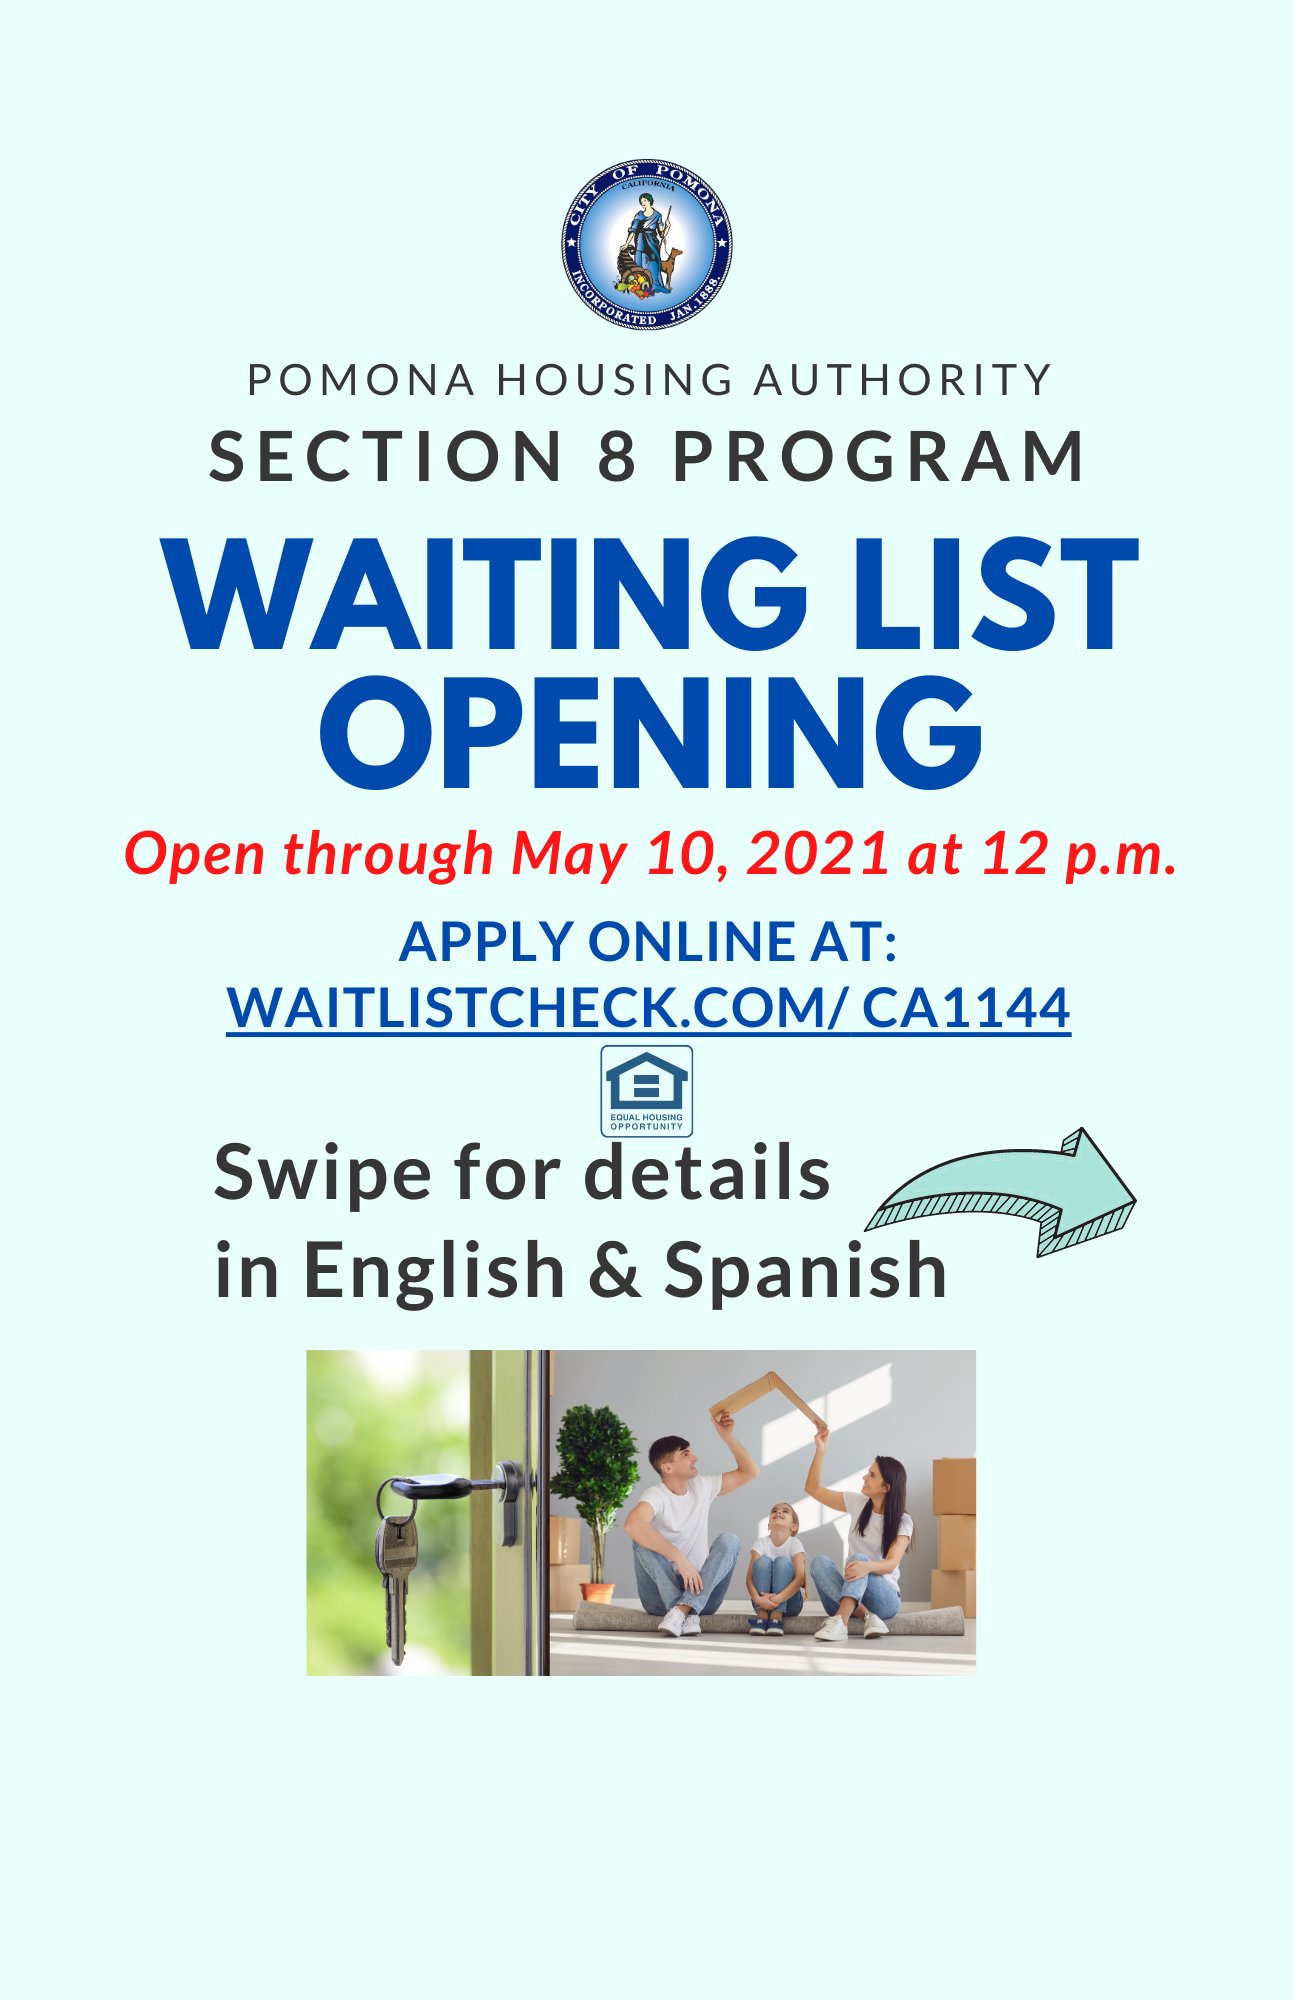 City Of Pomona Ca Opens Today 5 3 Thru 5 10 At 12 P M Section 8 Waitlist For Applications Open At T Co Lm11pmgdl8 Pomona Section8 Waitlistopen Housing T Co Fuwy07it6j Twitter